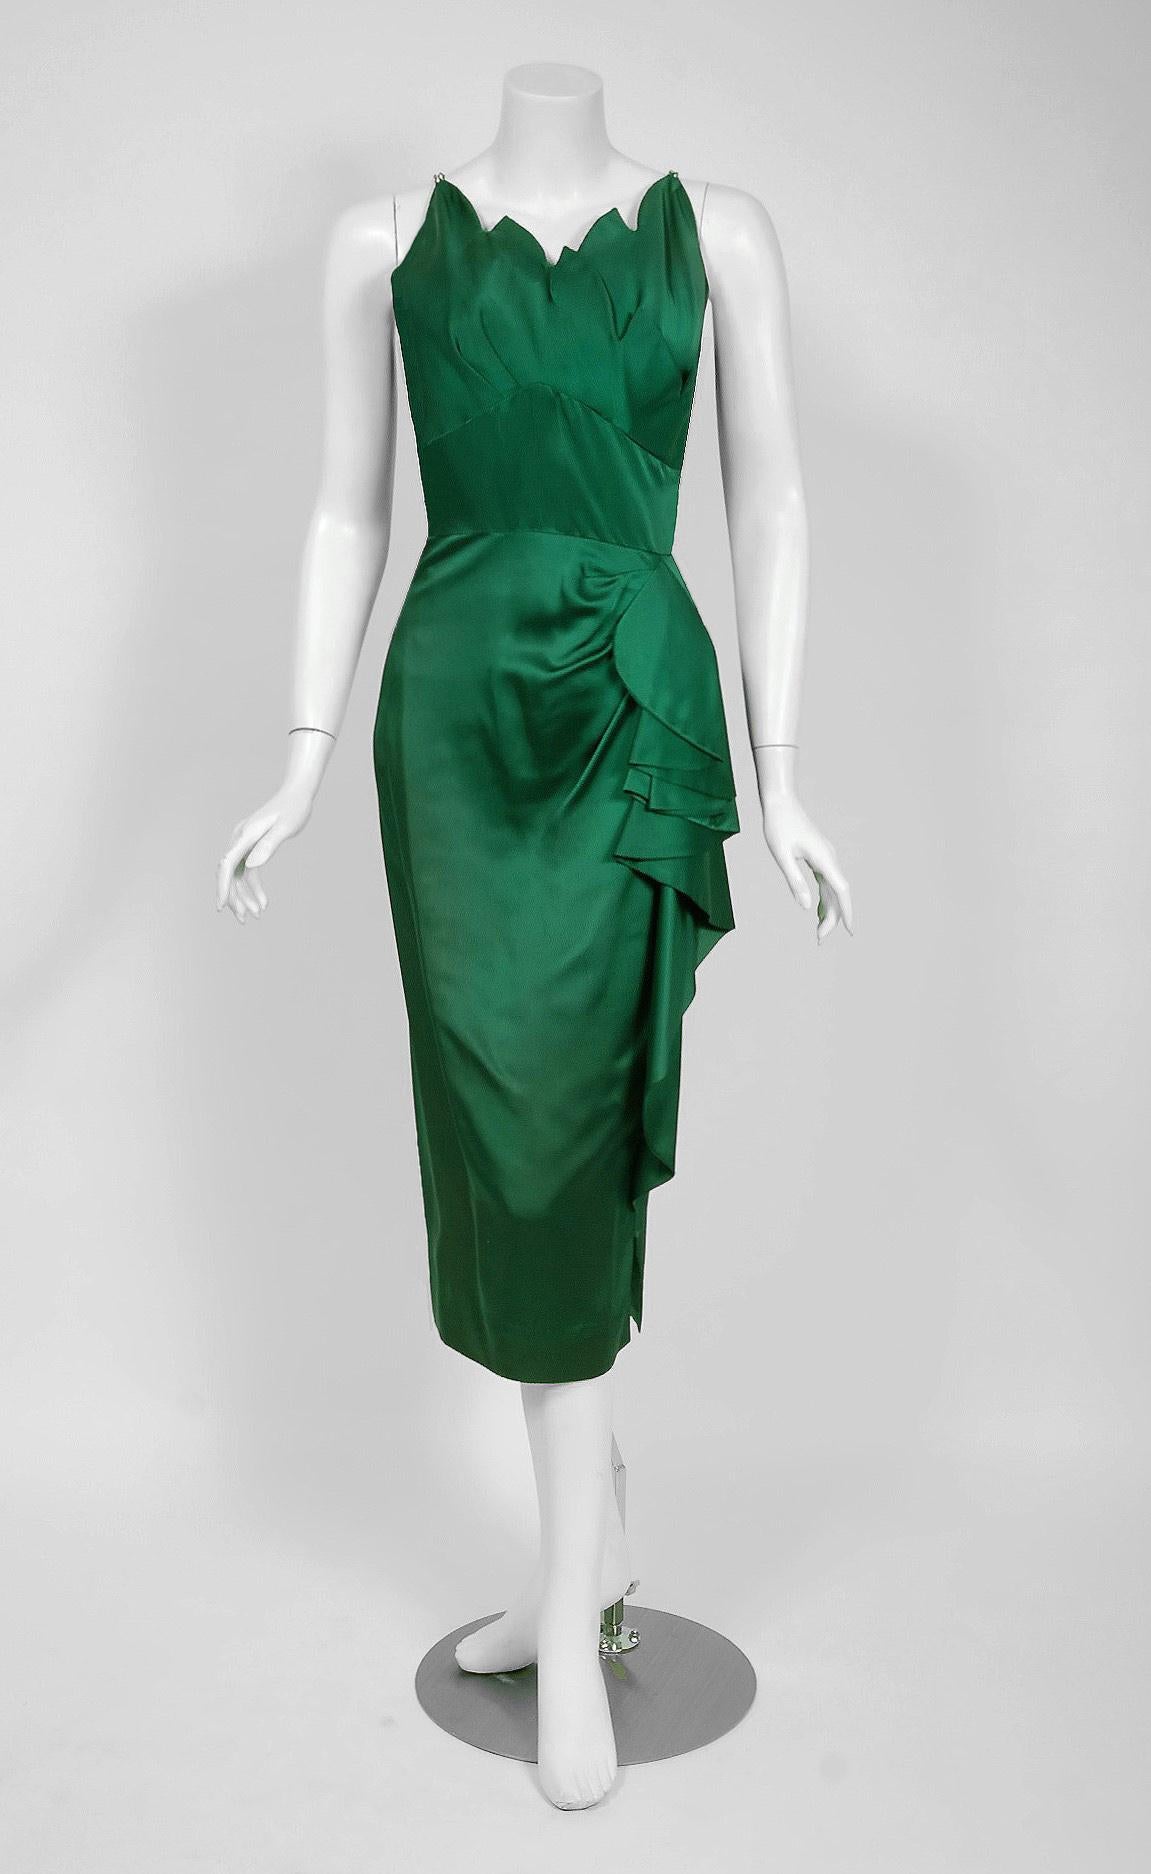 A seductive Andrée Gay designer forest-green silk cocktail set dating back to the 1940's Old Hollywood era of glamour! The bodice is an alluring rhinestone strap low-cut sculpted plunge to resemble fire flames. The nipped waist sculpted side peplum